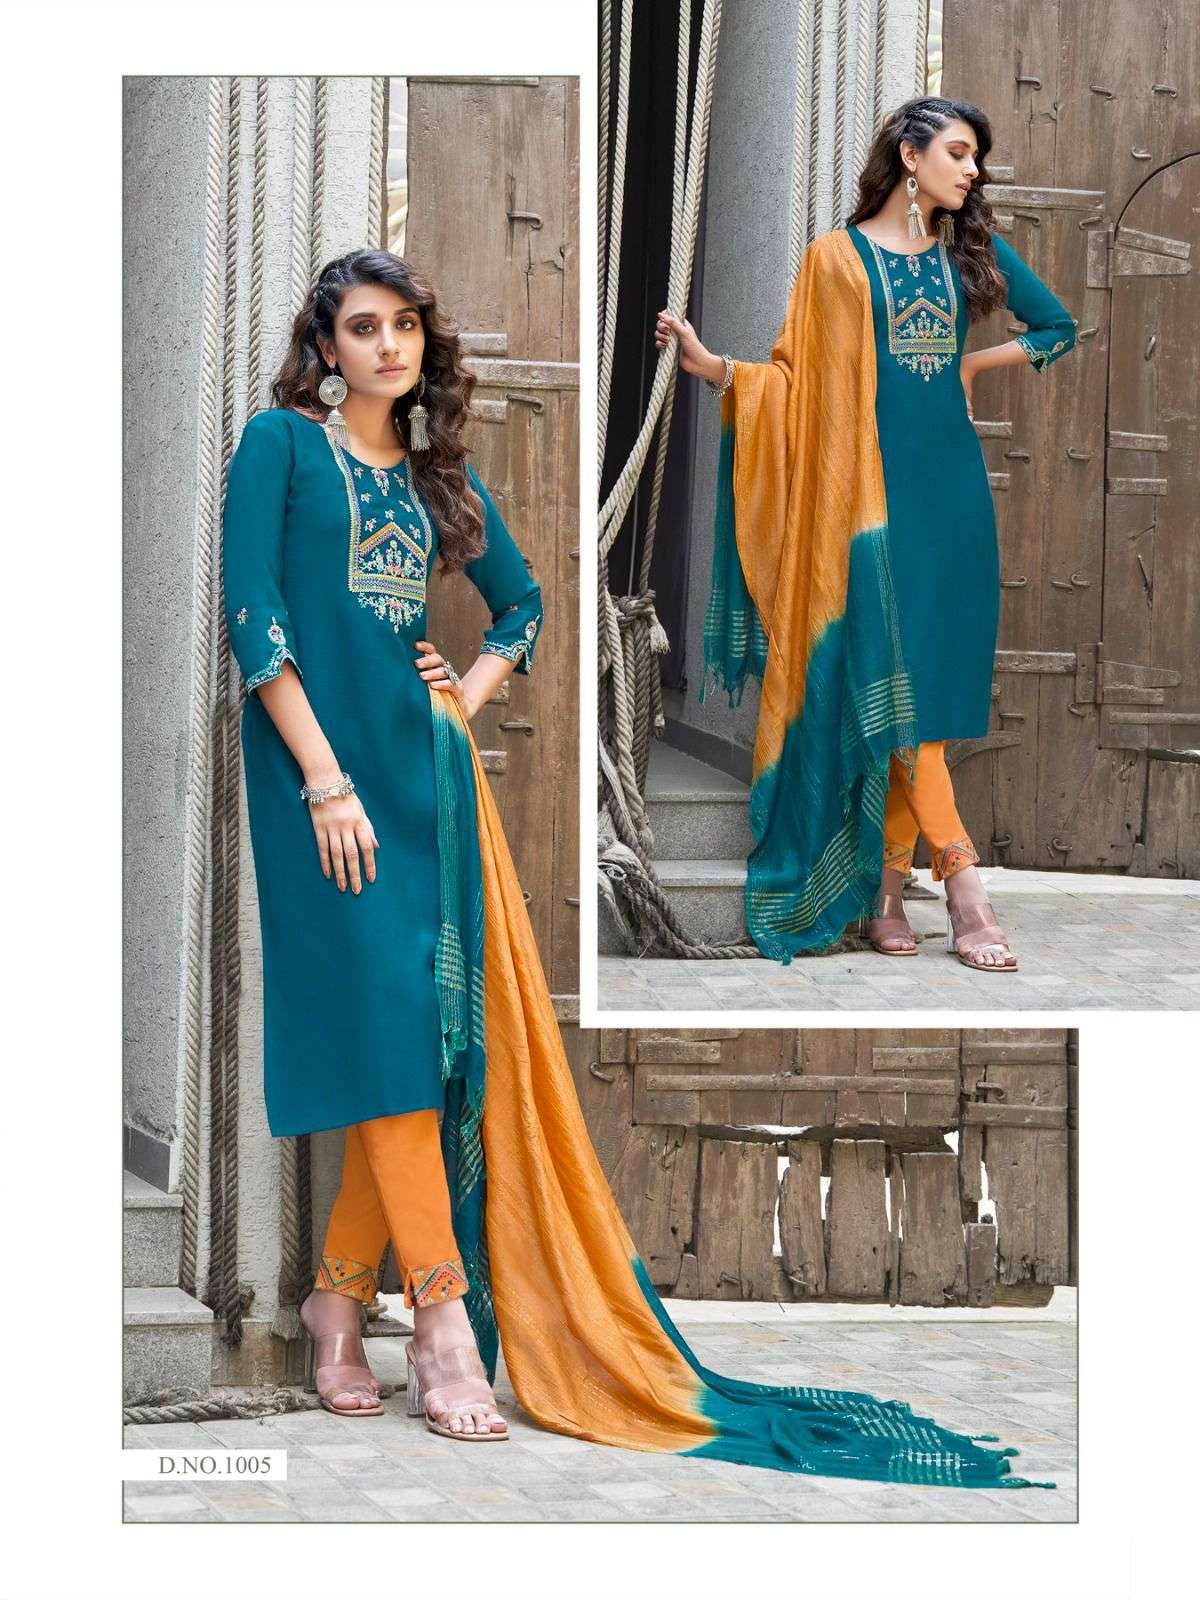 MAHI VOL-1 BY COLOURPIX 1001 TO 1006 SERIES DESIGNER SUITS BEAUTIFUL STYLISH FANCY COLORFUL PARTY WEAR & ETHNIC WEAR VISCOSE RAYON DRESSES AT WHOLESALE PRICE